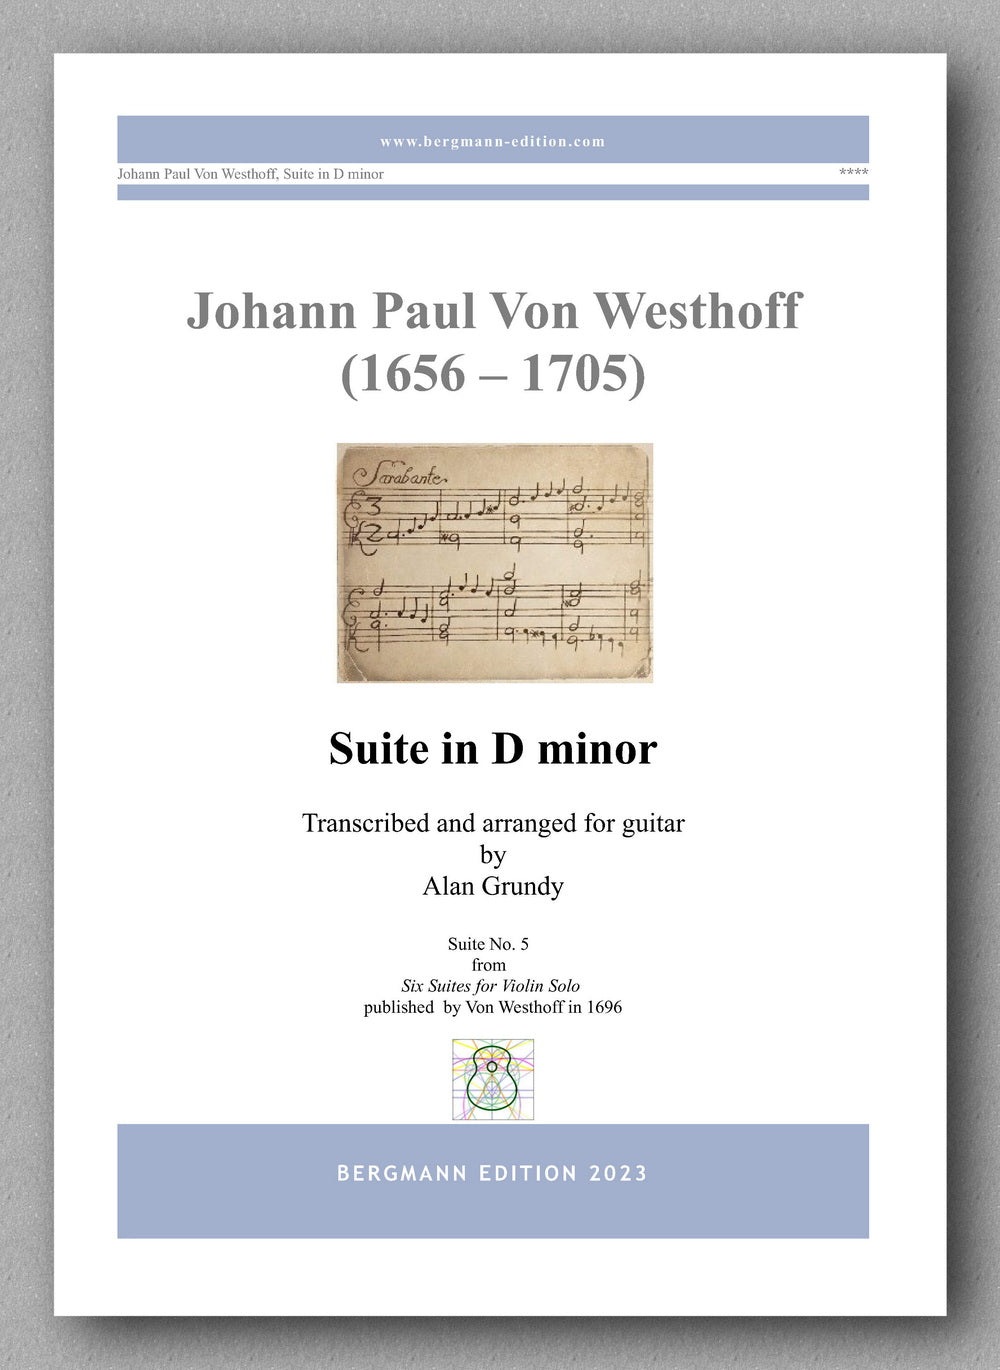 Johann Paul Von Westhoff, Suite in D minor - preview of the cover